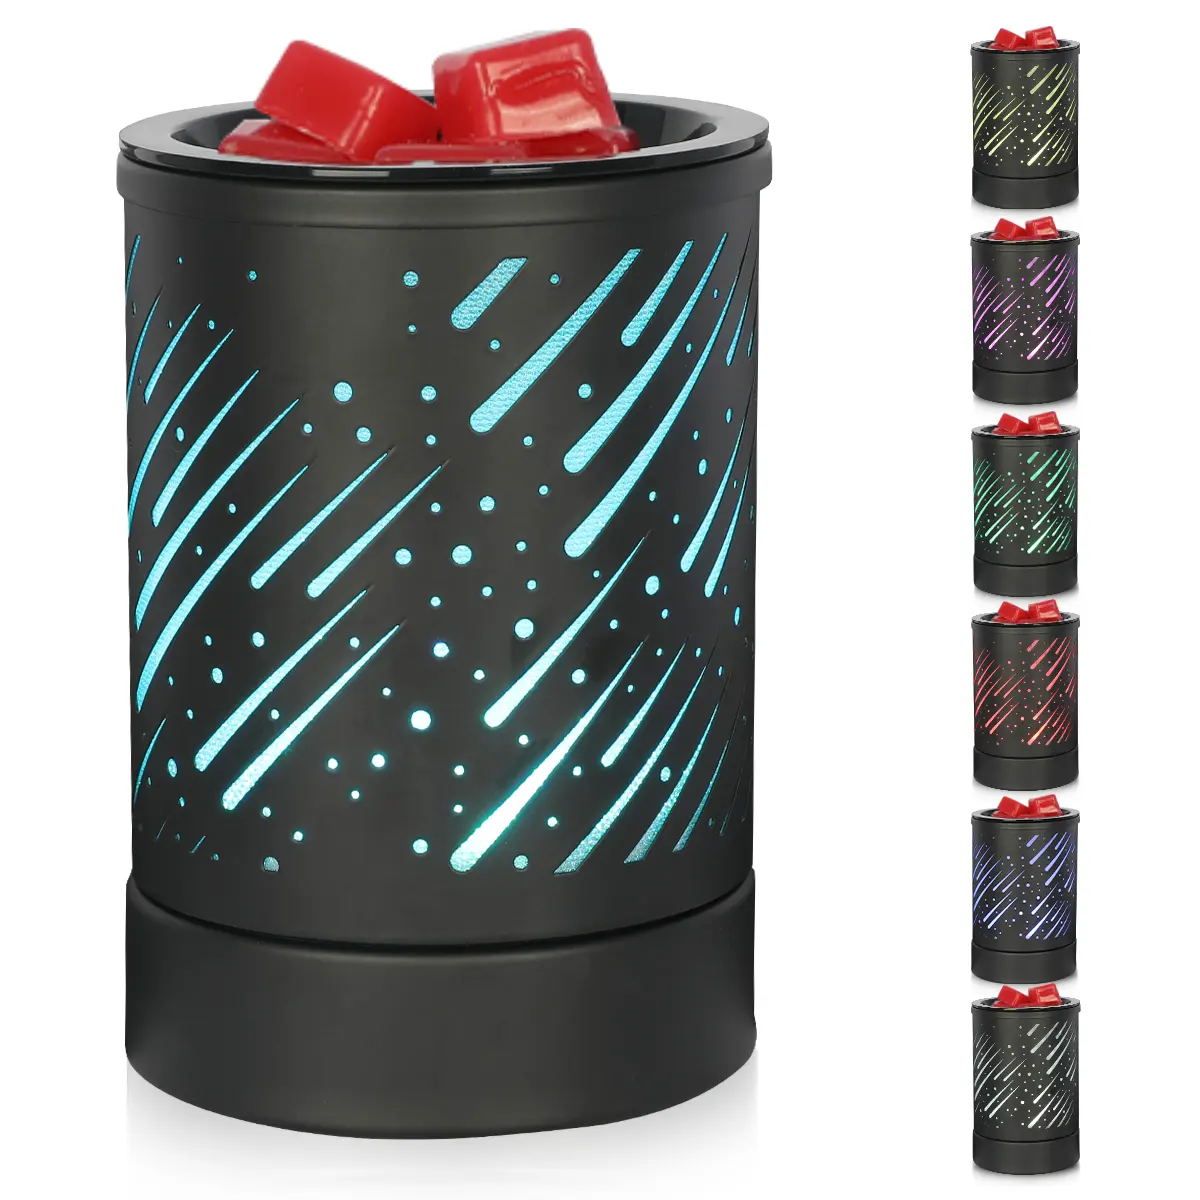 Black Metal romantic meteor pattern electric wax melt warmer for scented wax fragrance lamp for sleeping study office